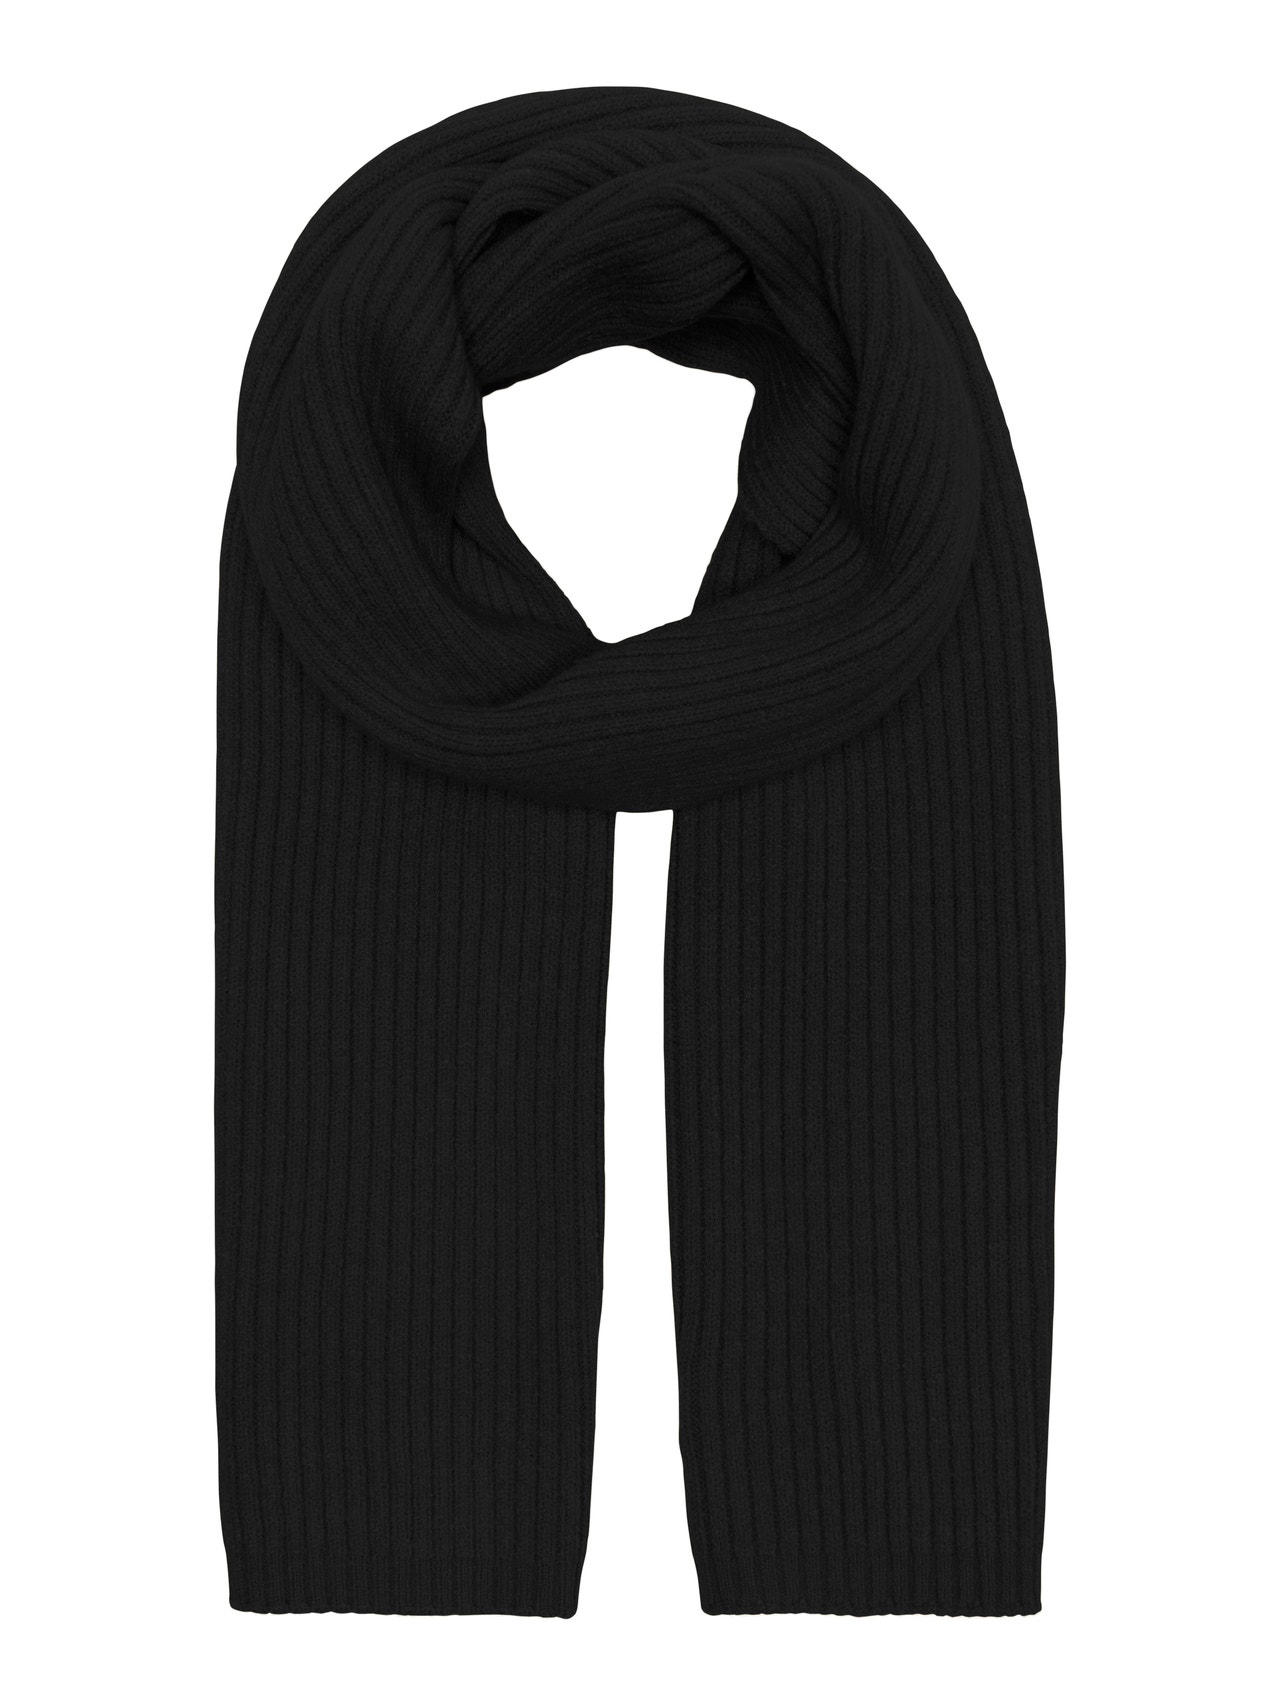 ONLY Scarf -Black - 15302460